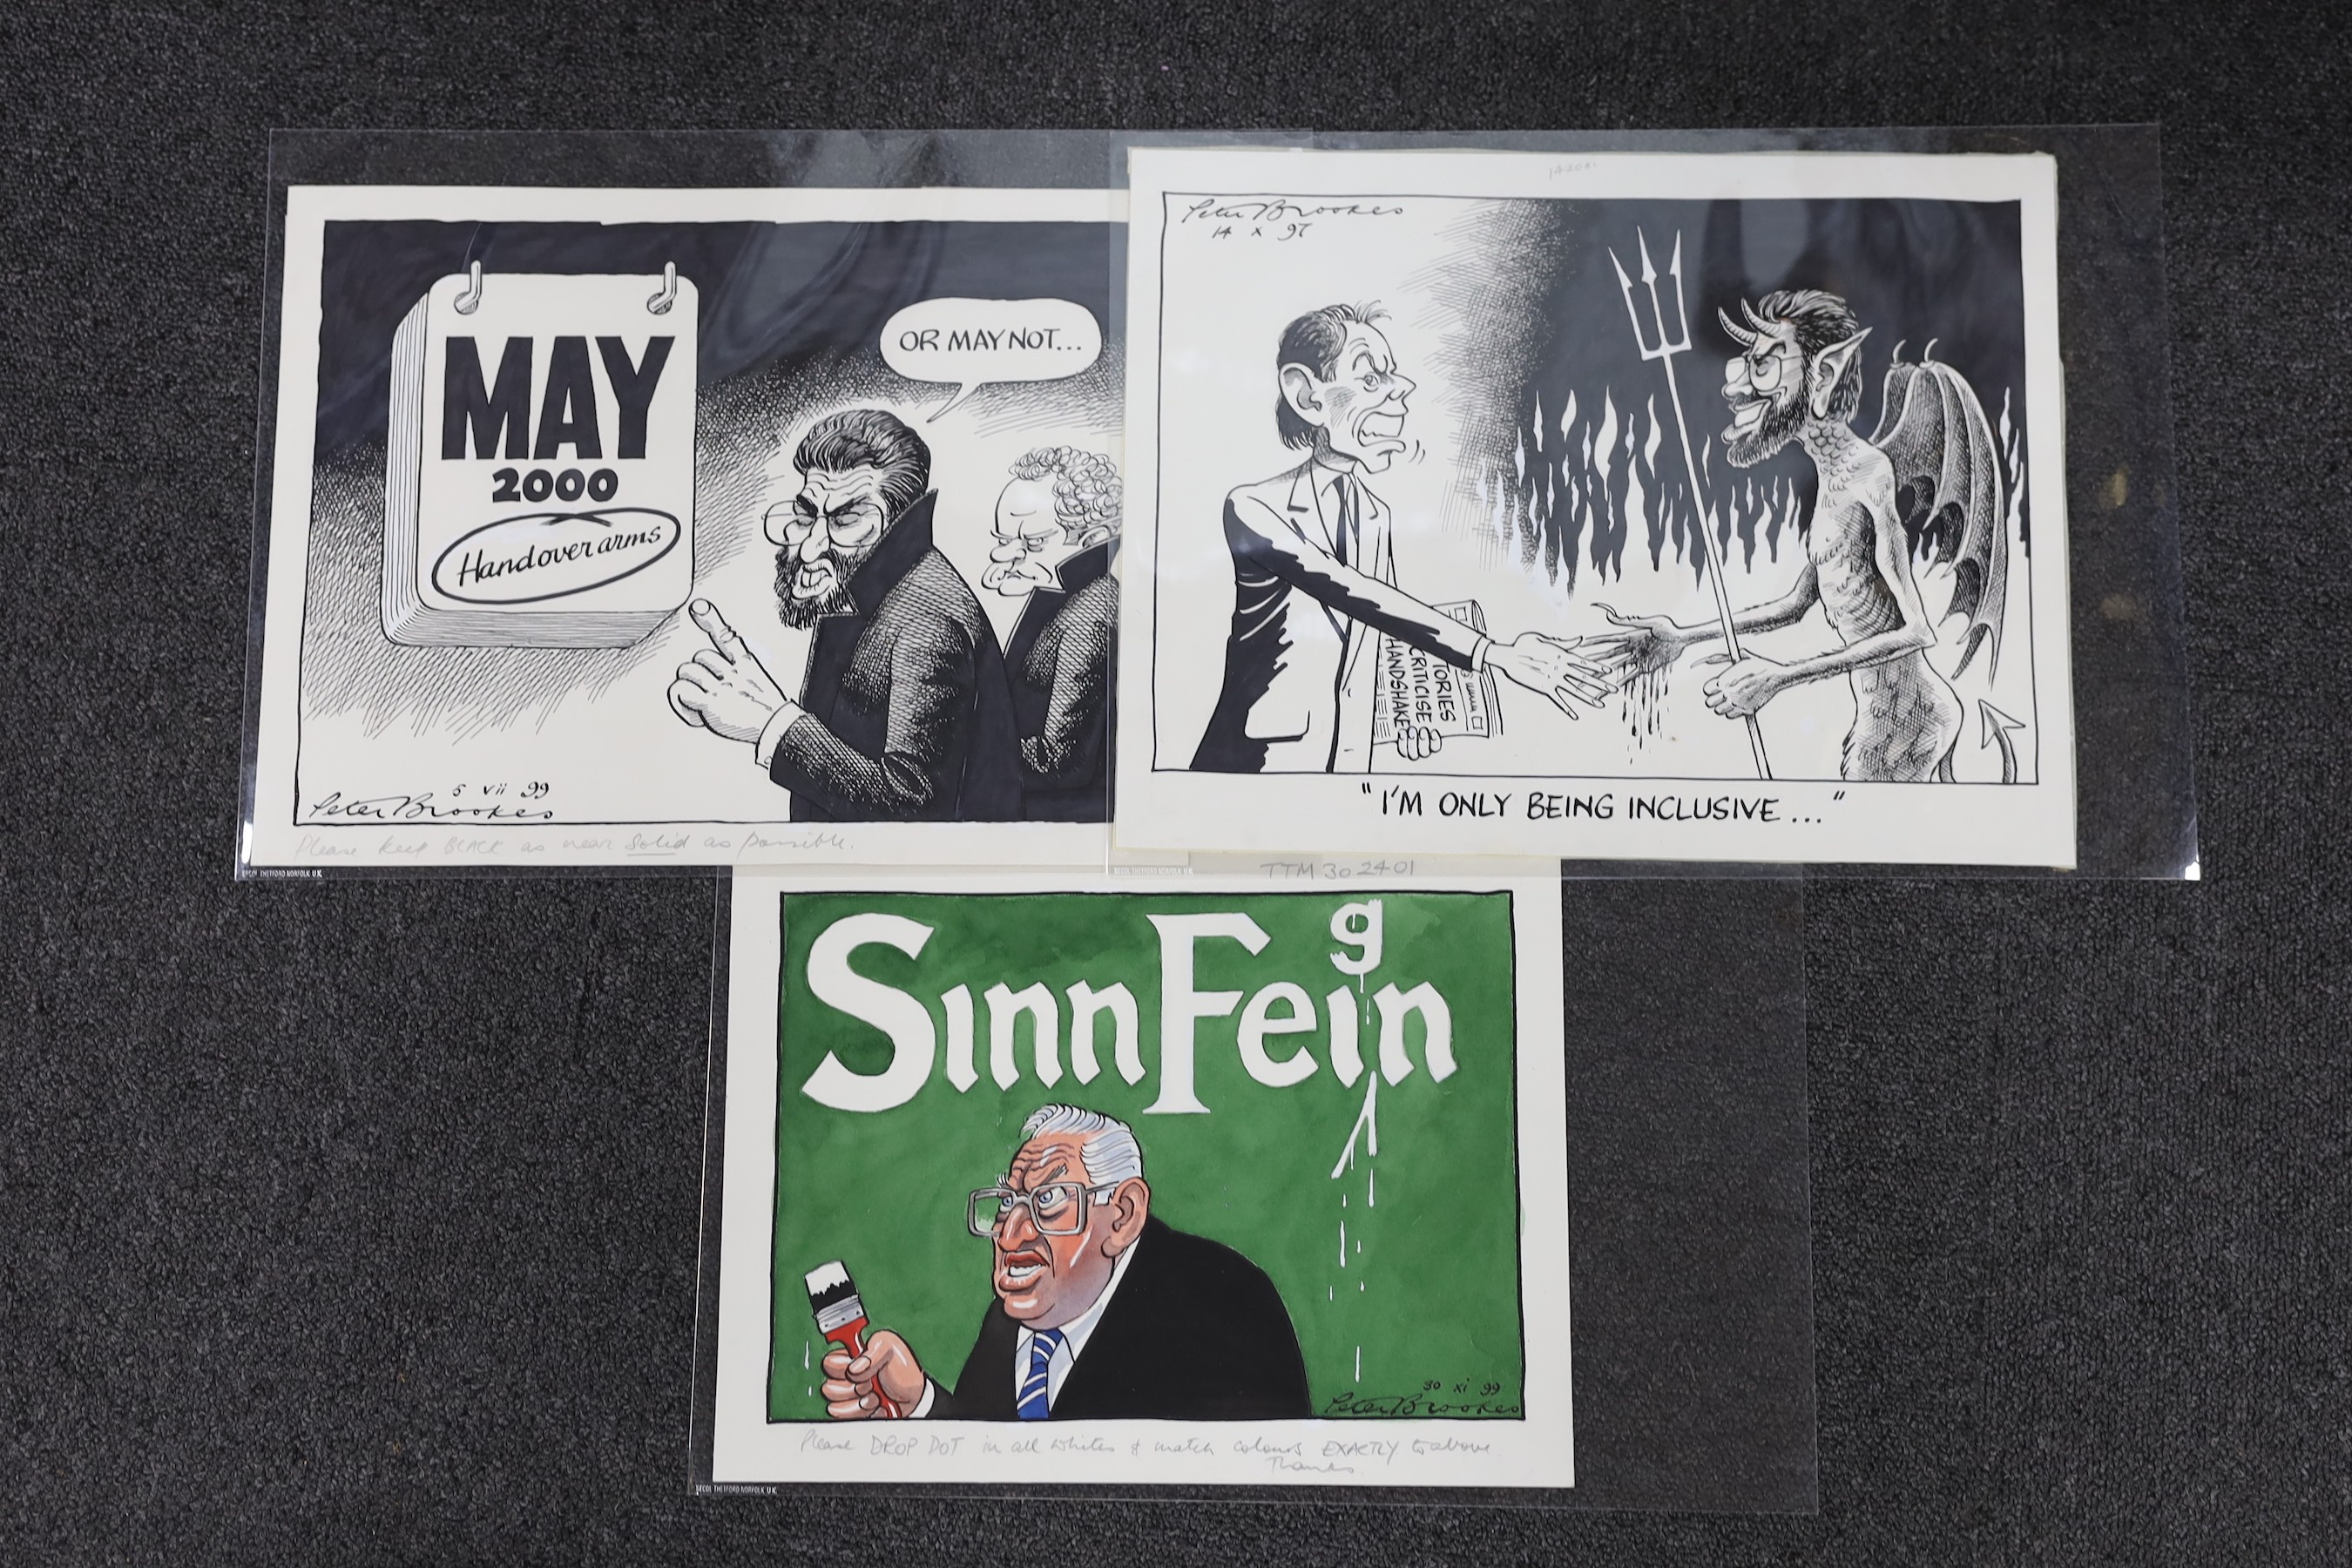 Peter Brookes (9143-), three original ink and watercolour cartoons, all relating to Irish subjects, 'Sinn Feign' 1999, 'May 2000 hand over arms' and 'I'm only being inclusive' 1997, signed and dated with artists notes, l